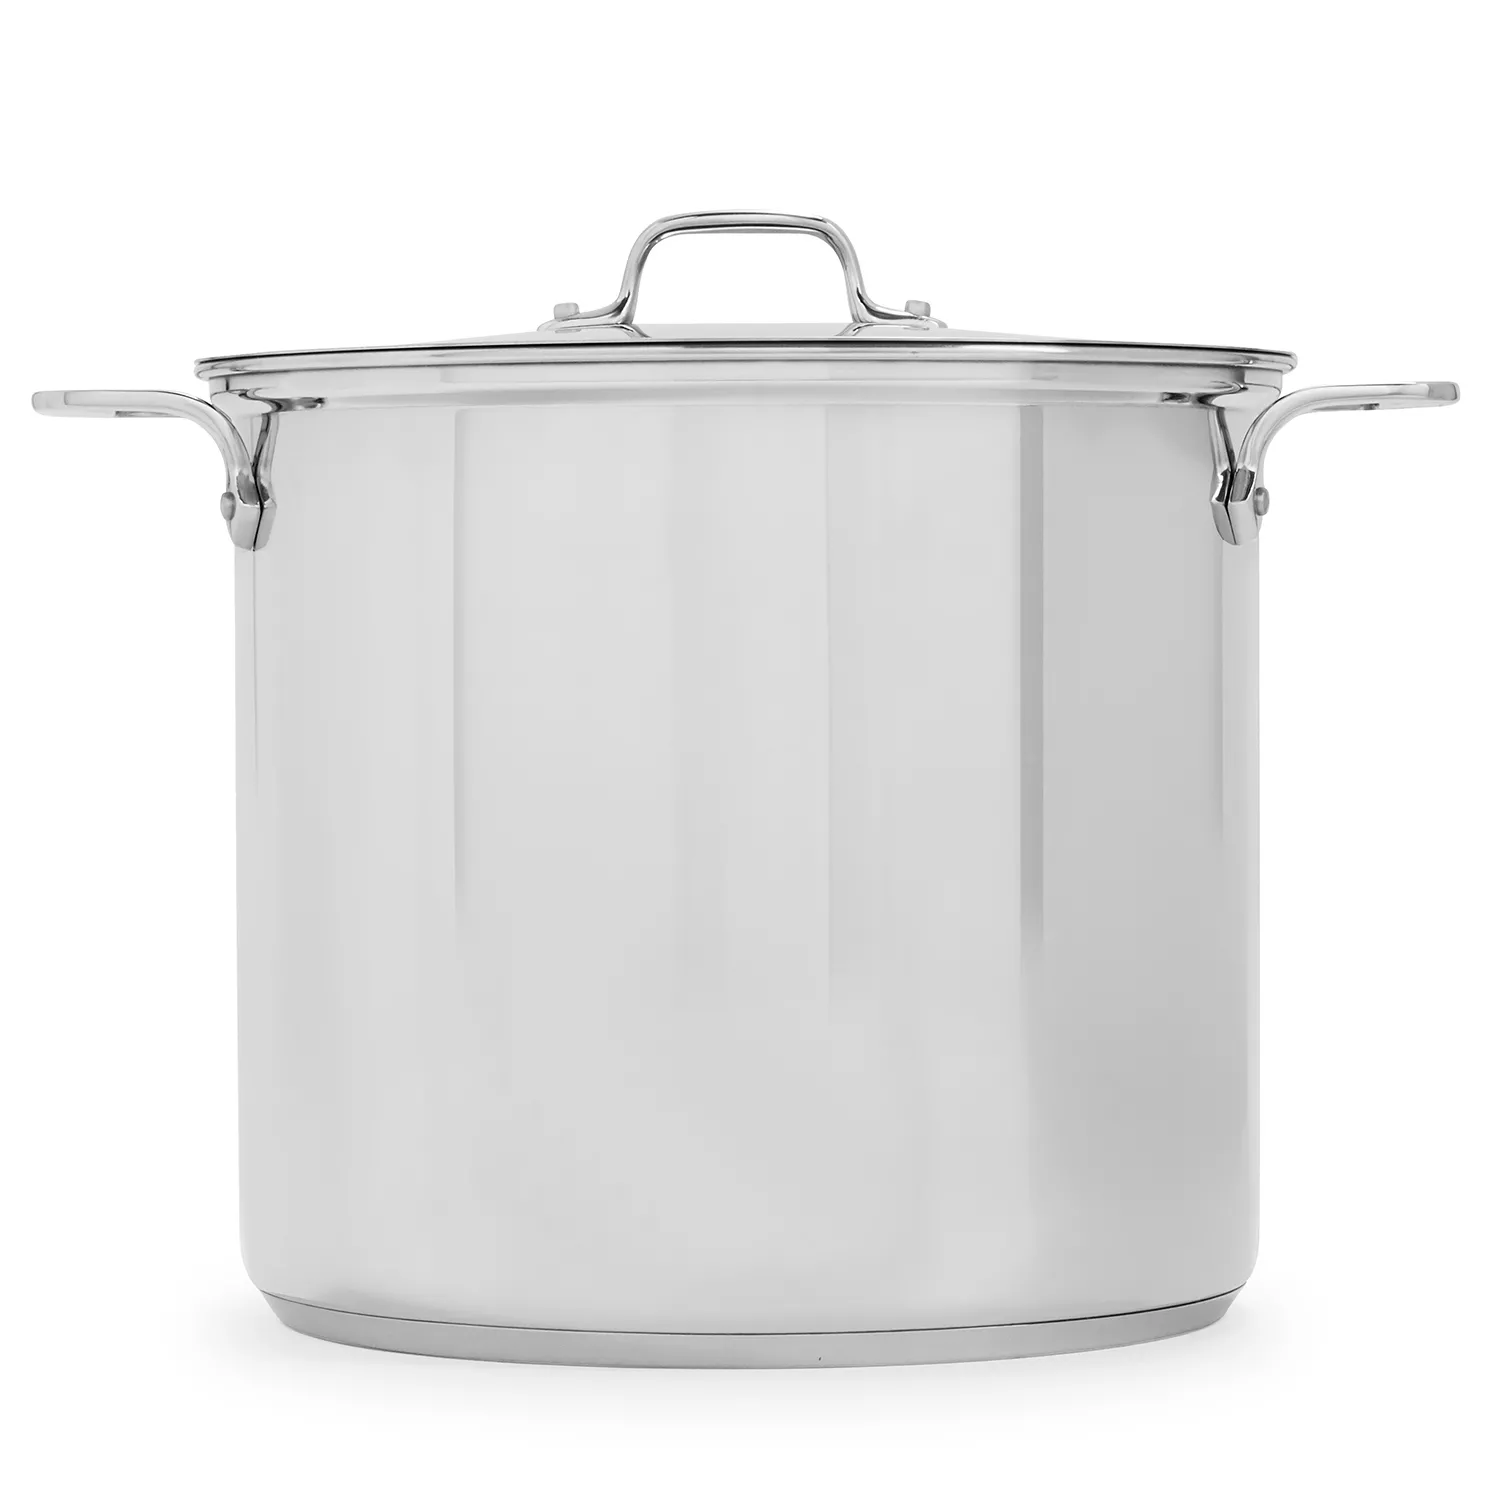 All-Clad Stainless Steel Stockpot, 16 Qt.